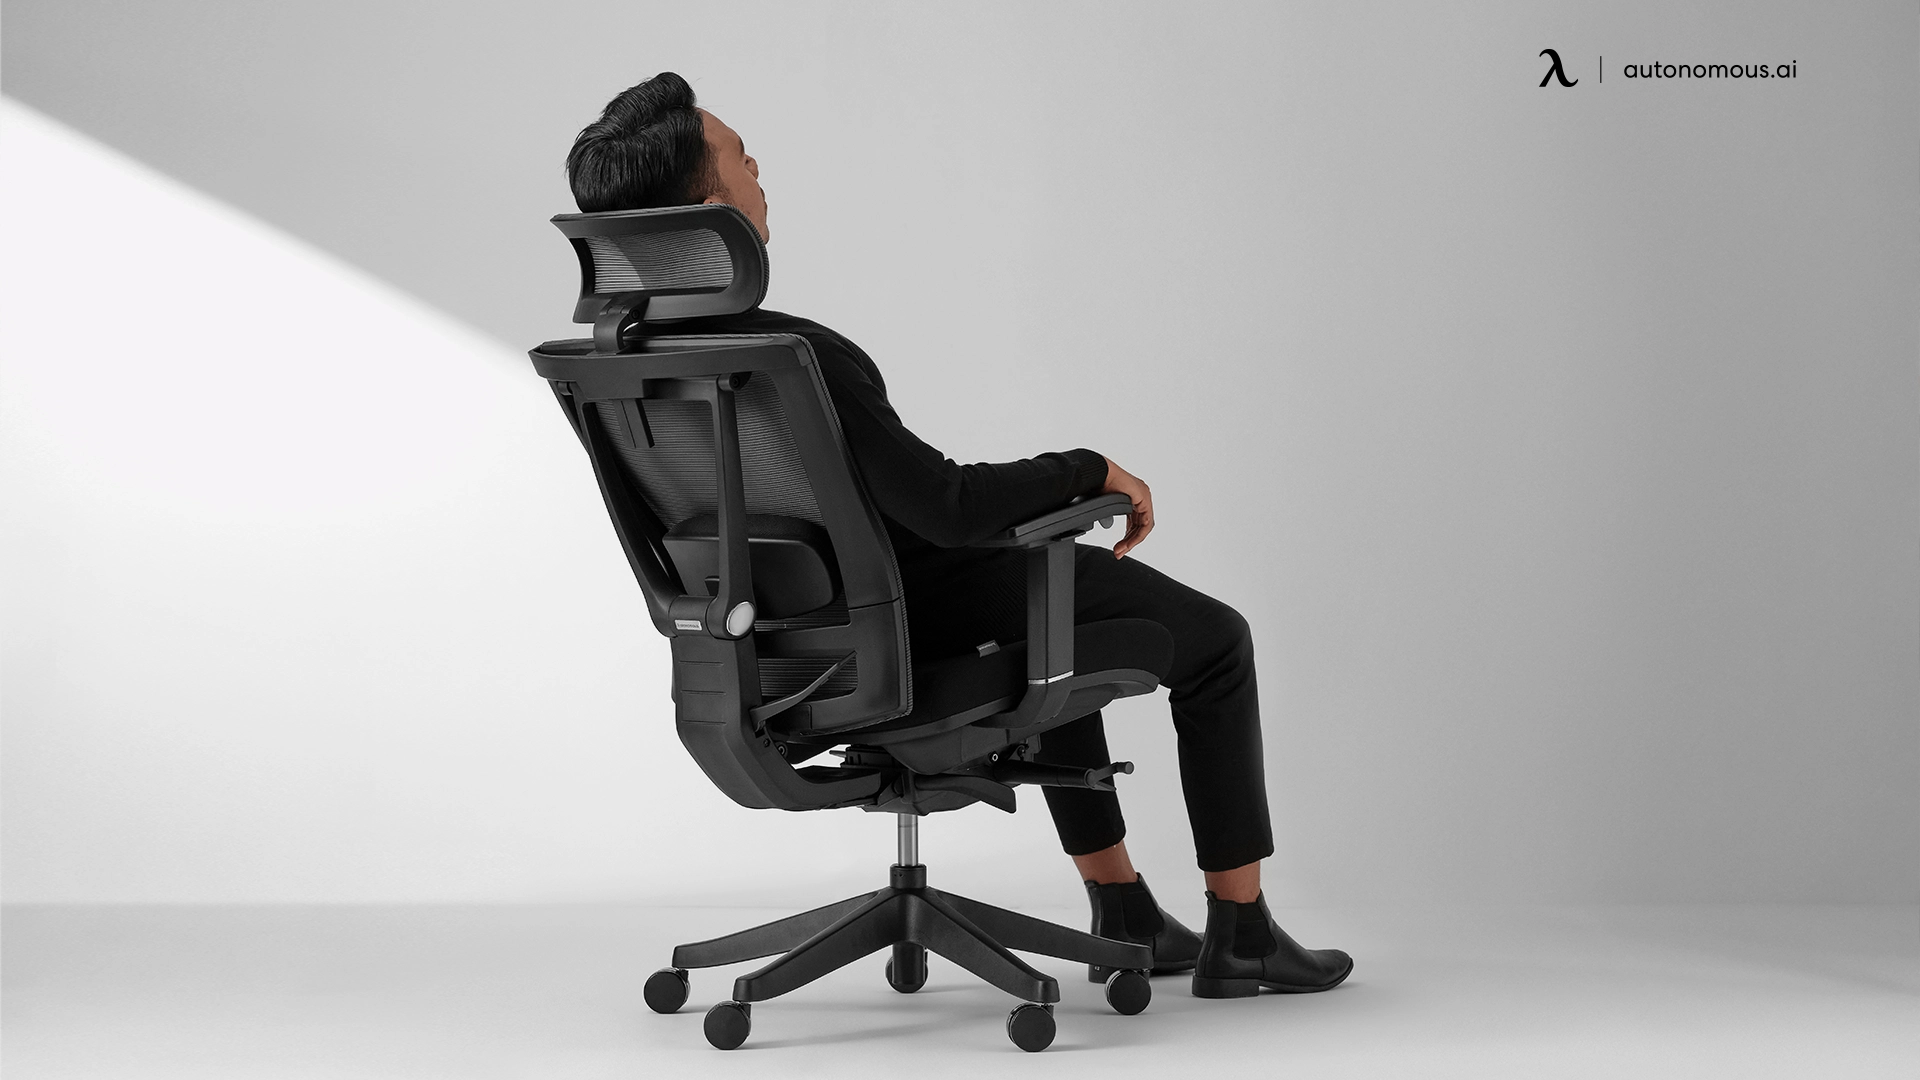 Ensuring Long-lasting Performance of Big and Tall Desk Chairs